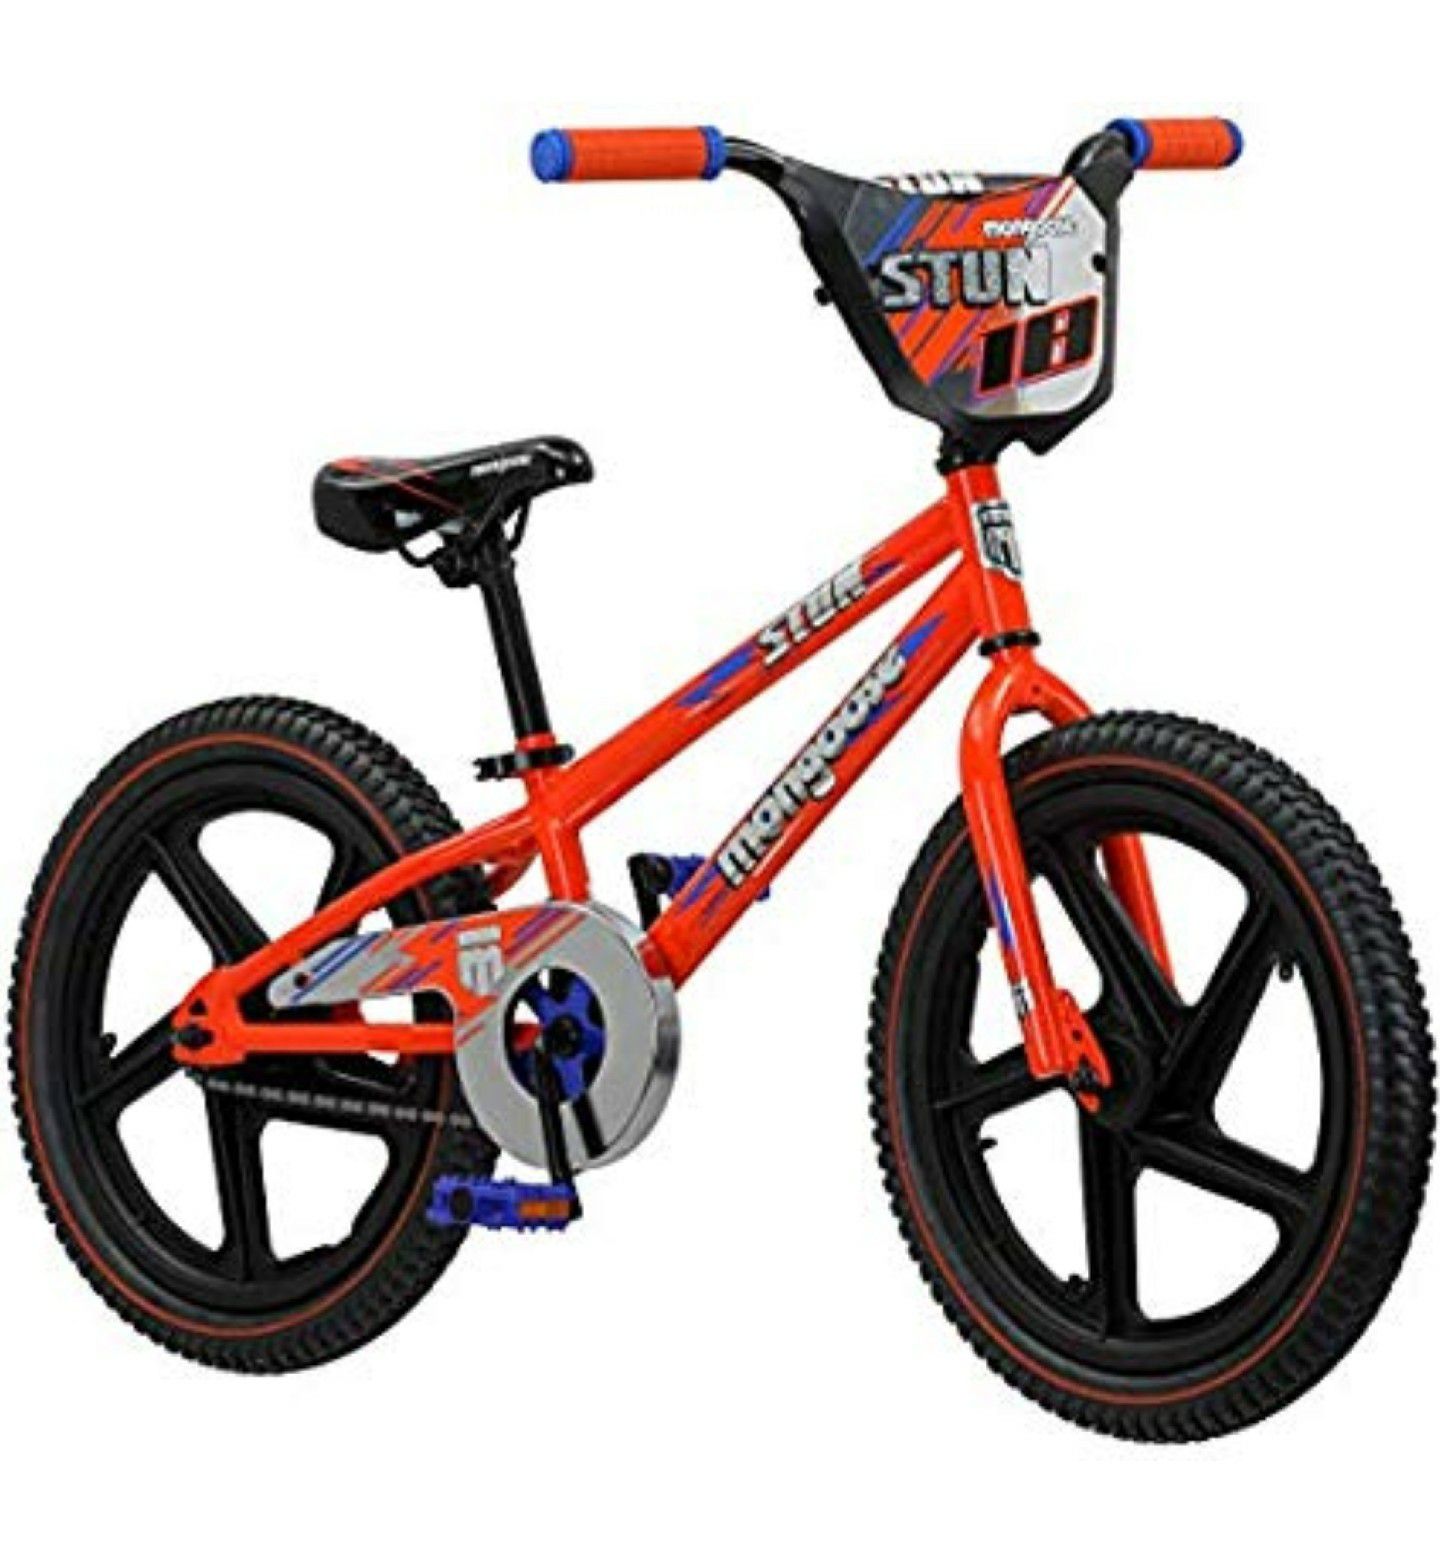 New Unopened Mongoose Stun Freestyle BMX Bike with Mag Wheels for Kids